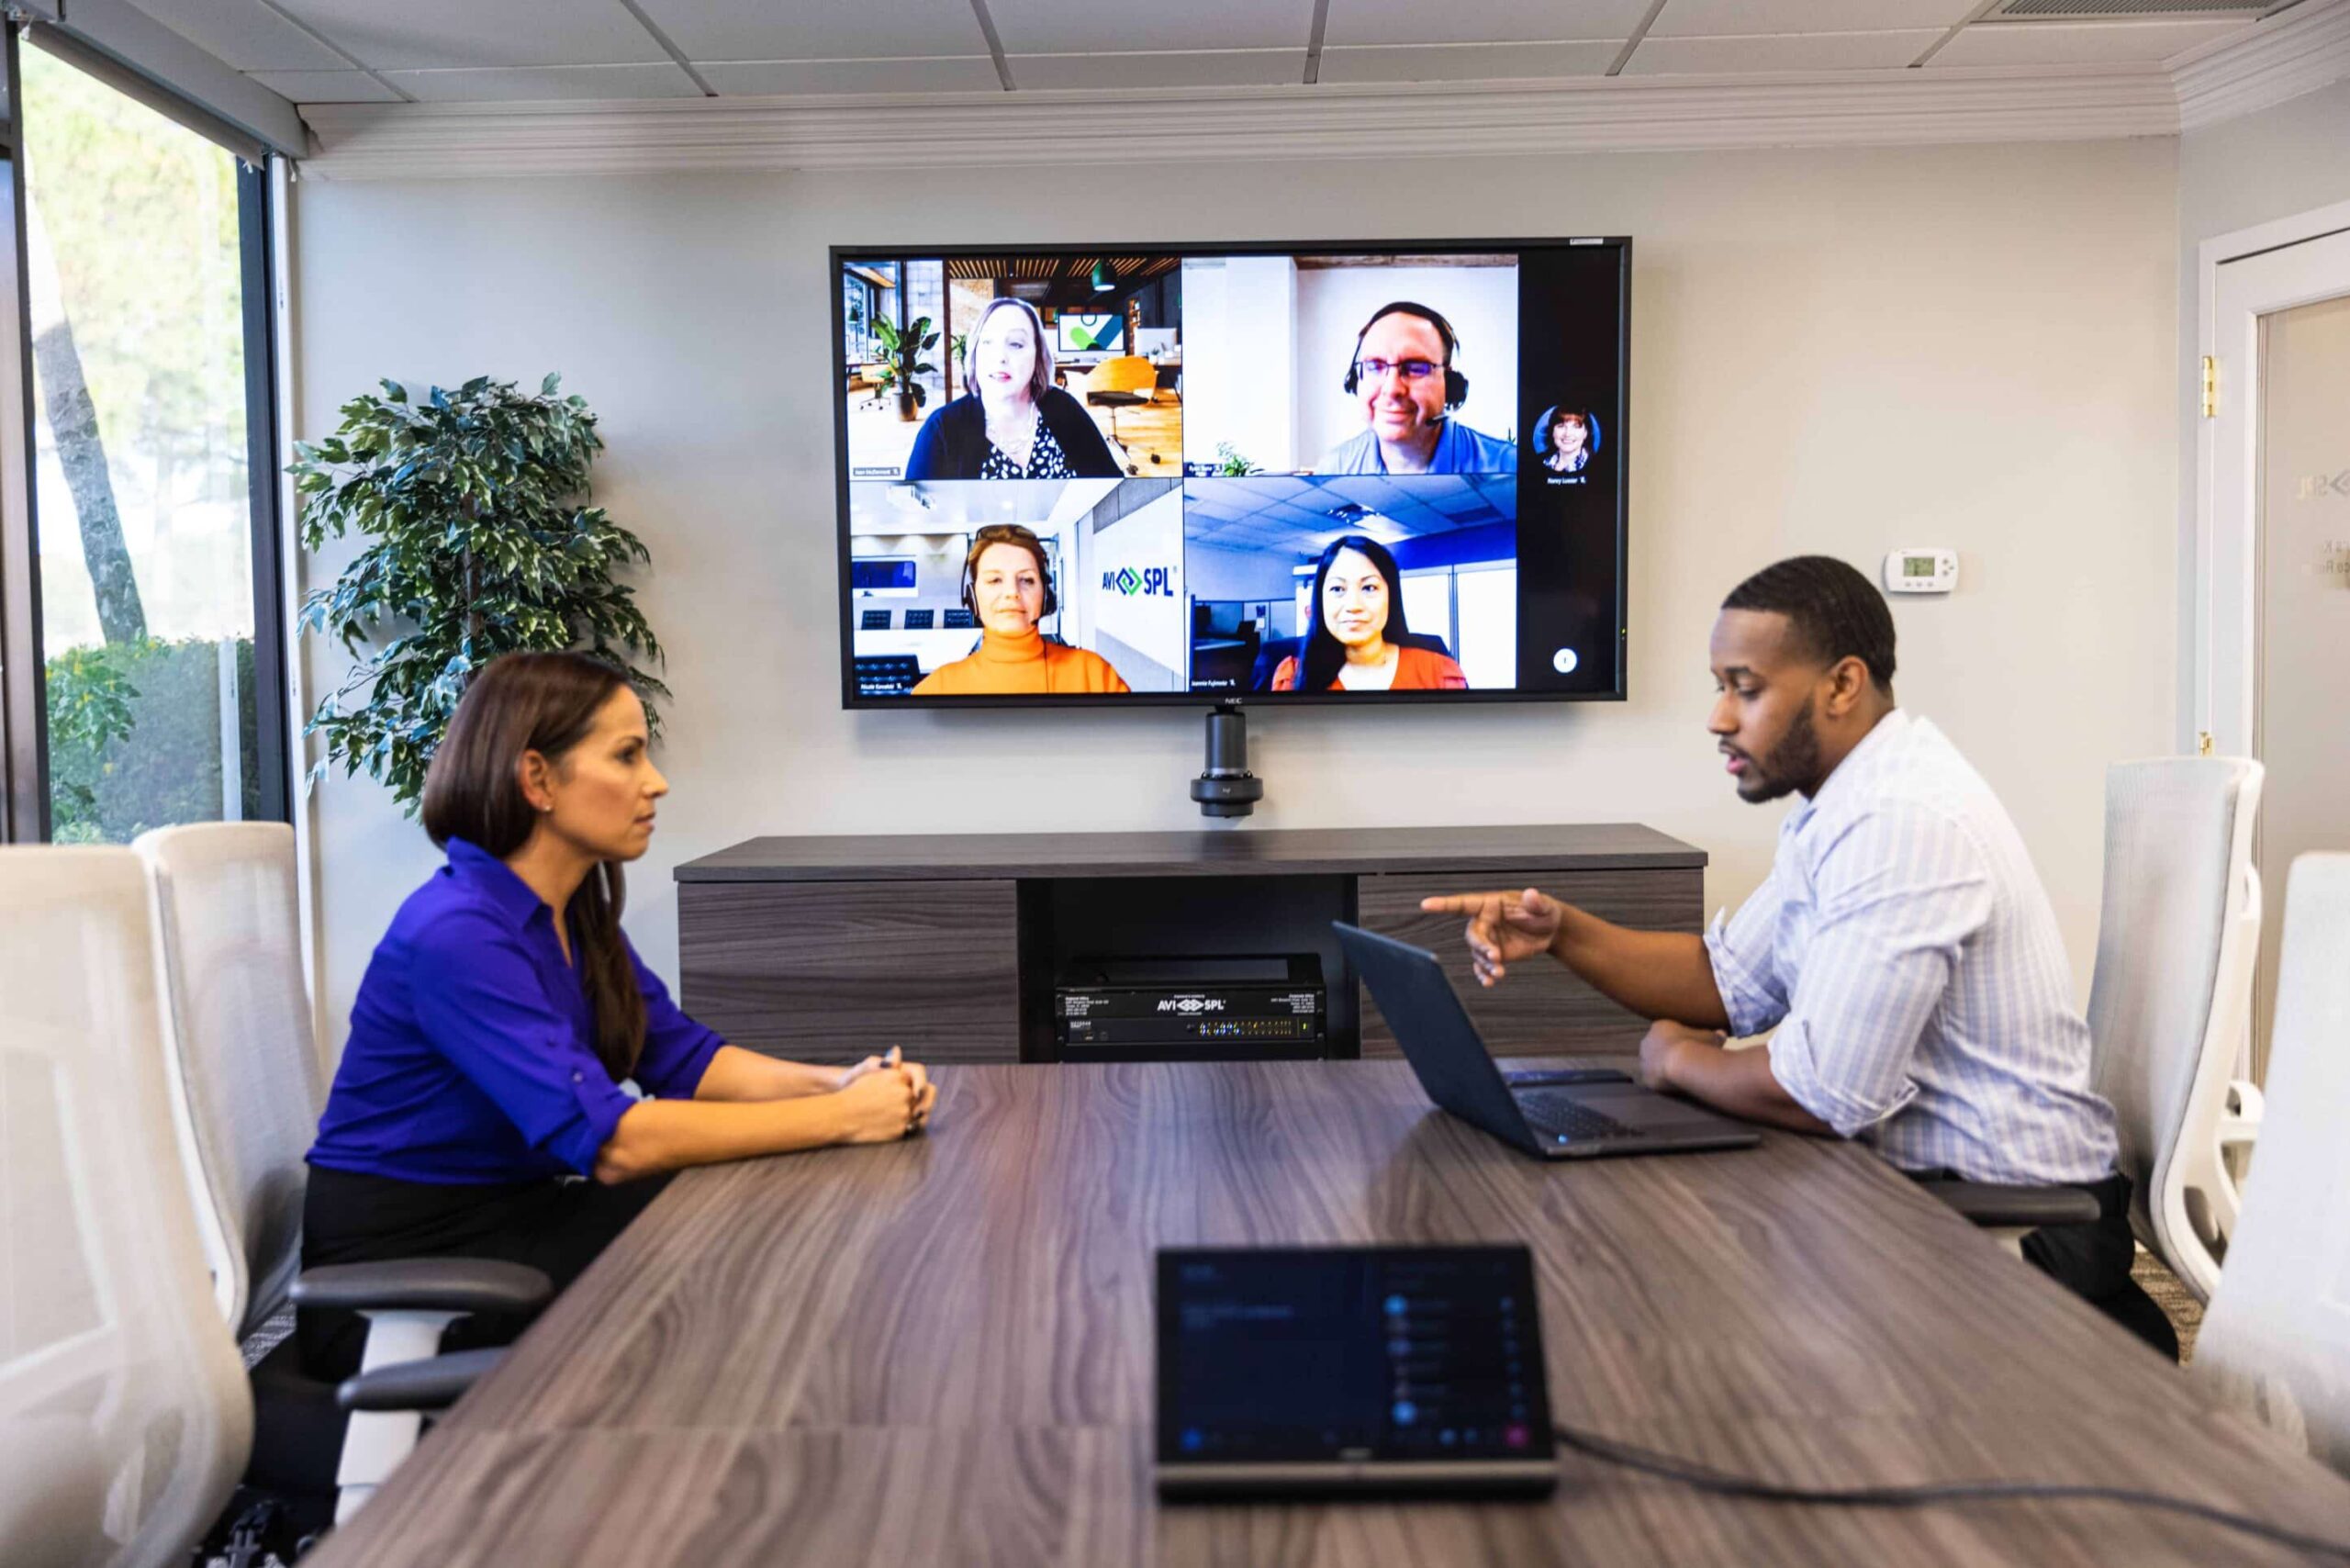 Virtual conference in a meeting room with remote participants on a large monitor